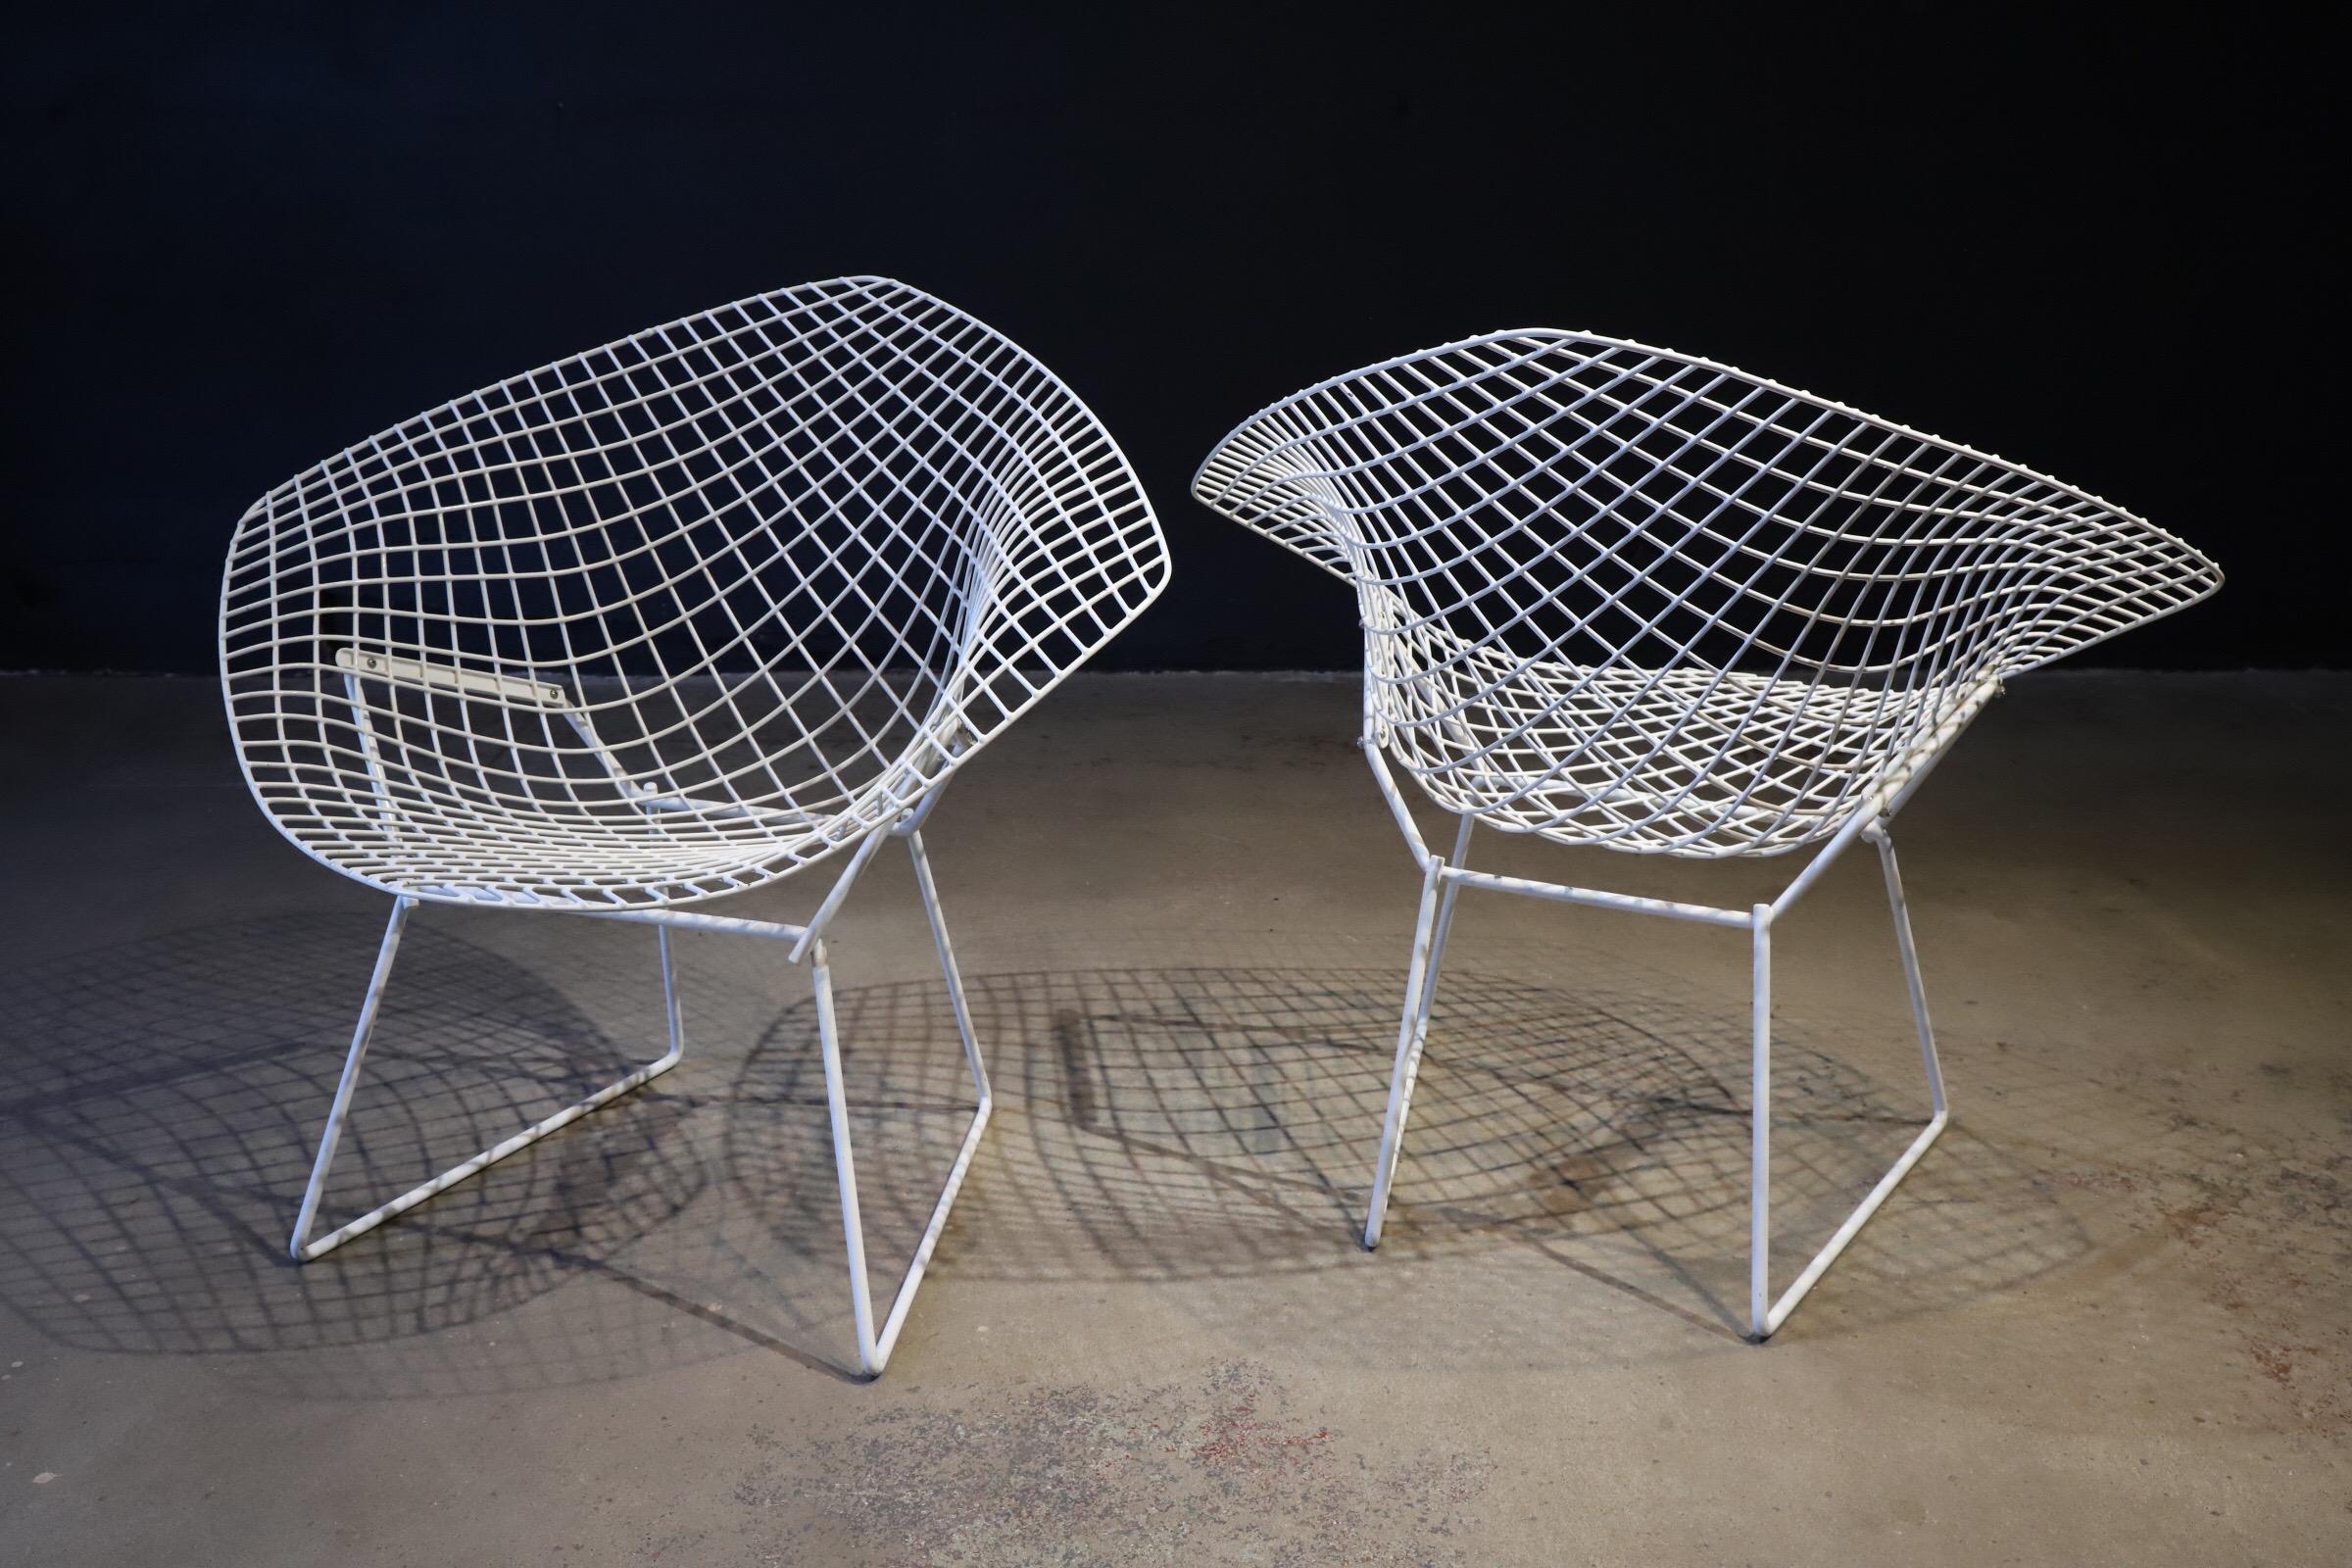 Pair of white diamond chairs by Harry Bertoia for Knoll. Original condition. Diamonds are timeless & always collectible. Photographed with Saarinen tulip stool for scale. Total of four chairs available (two shown in this listing)